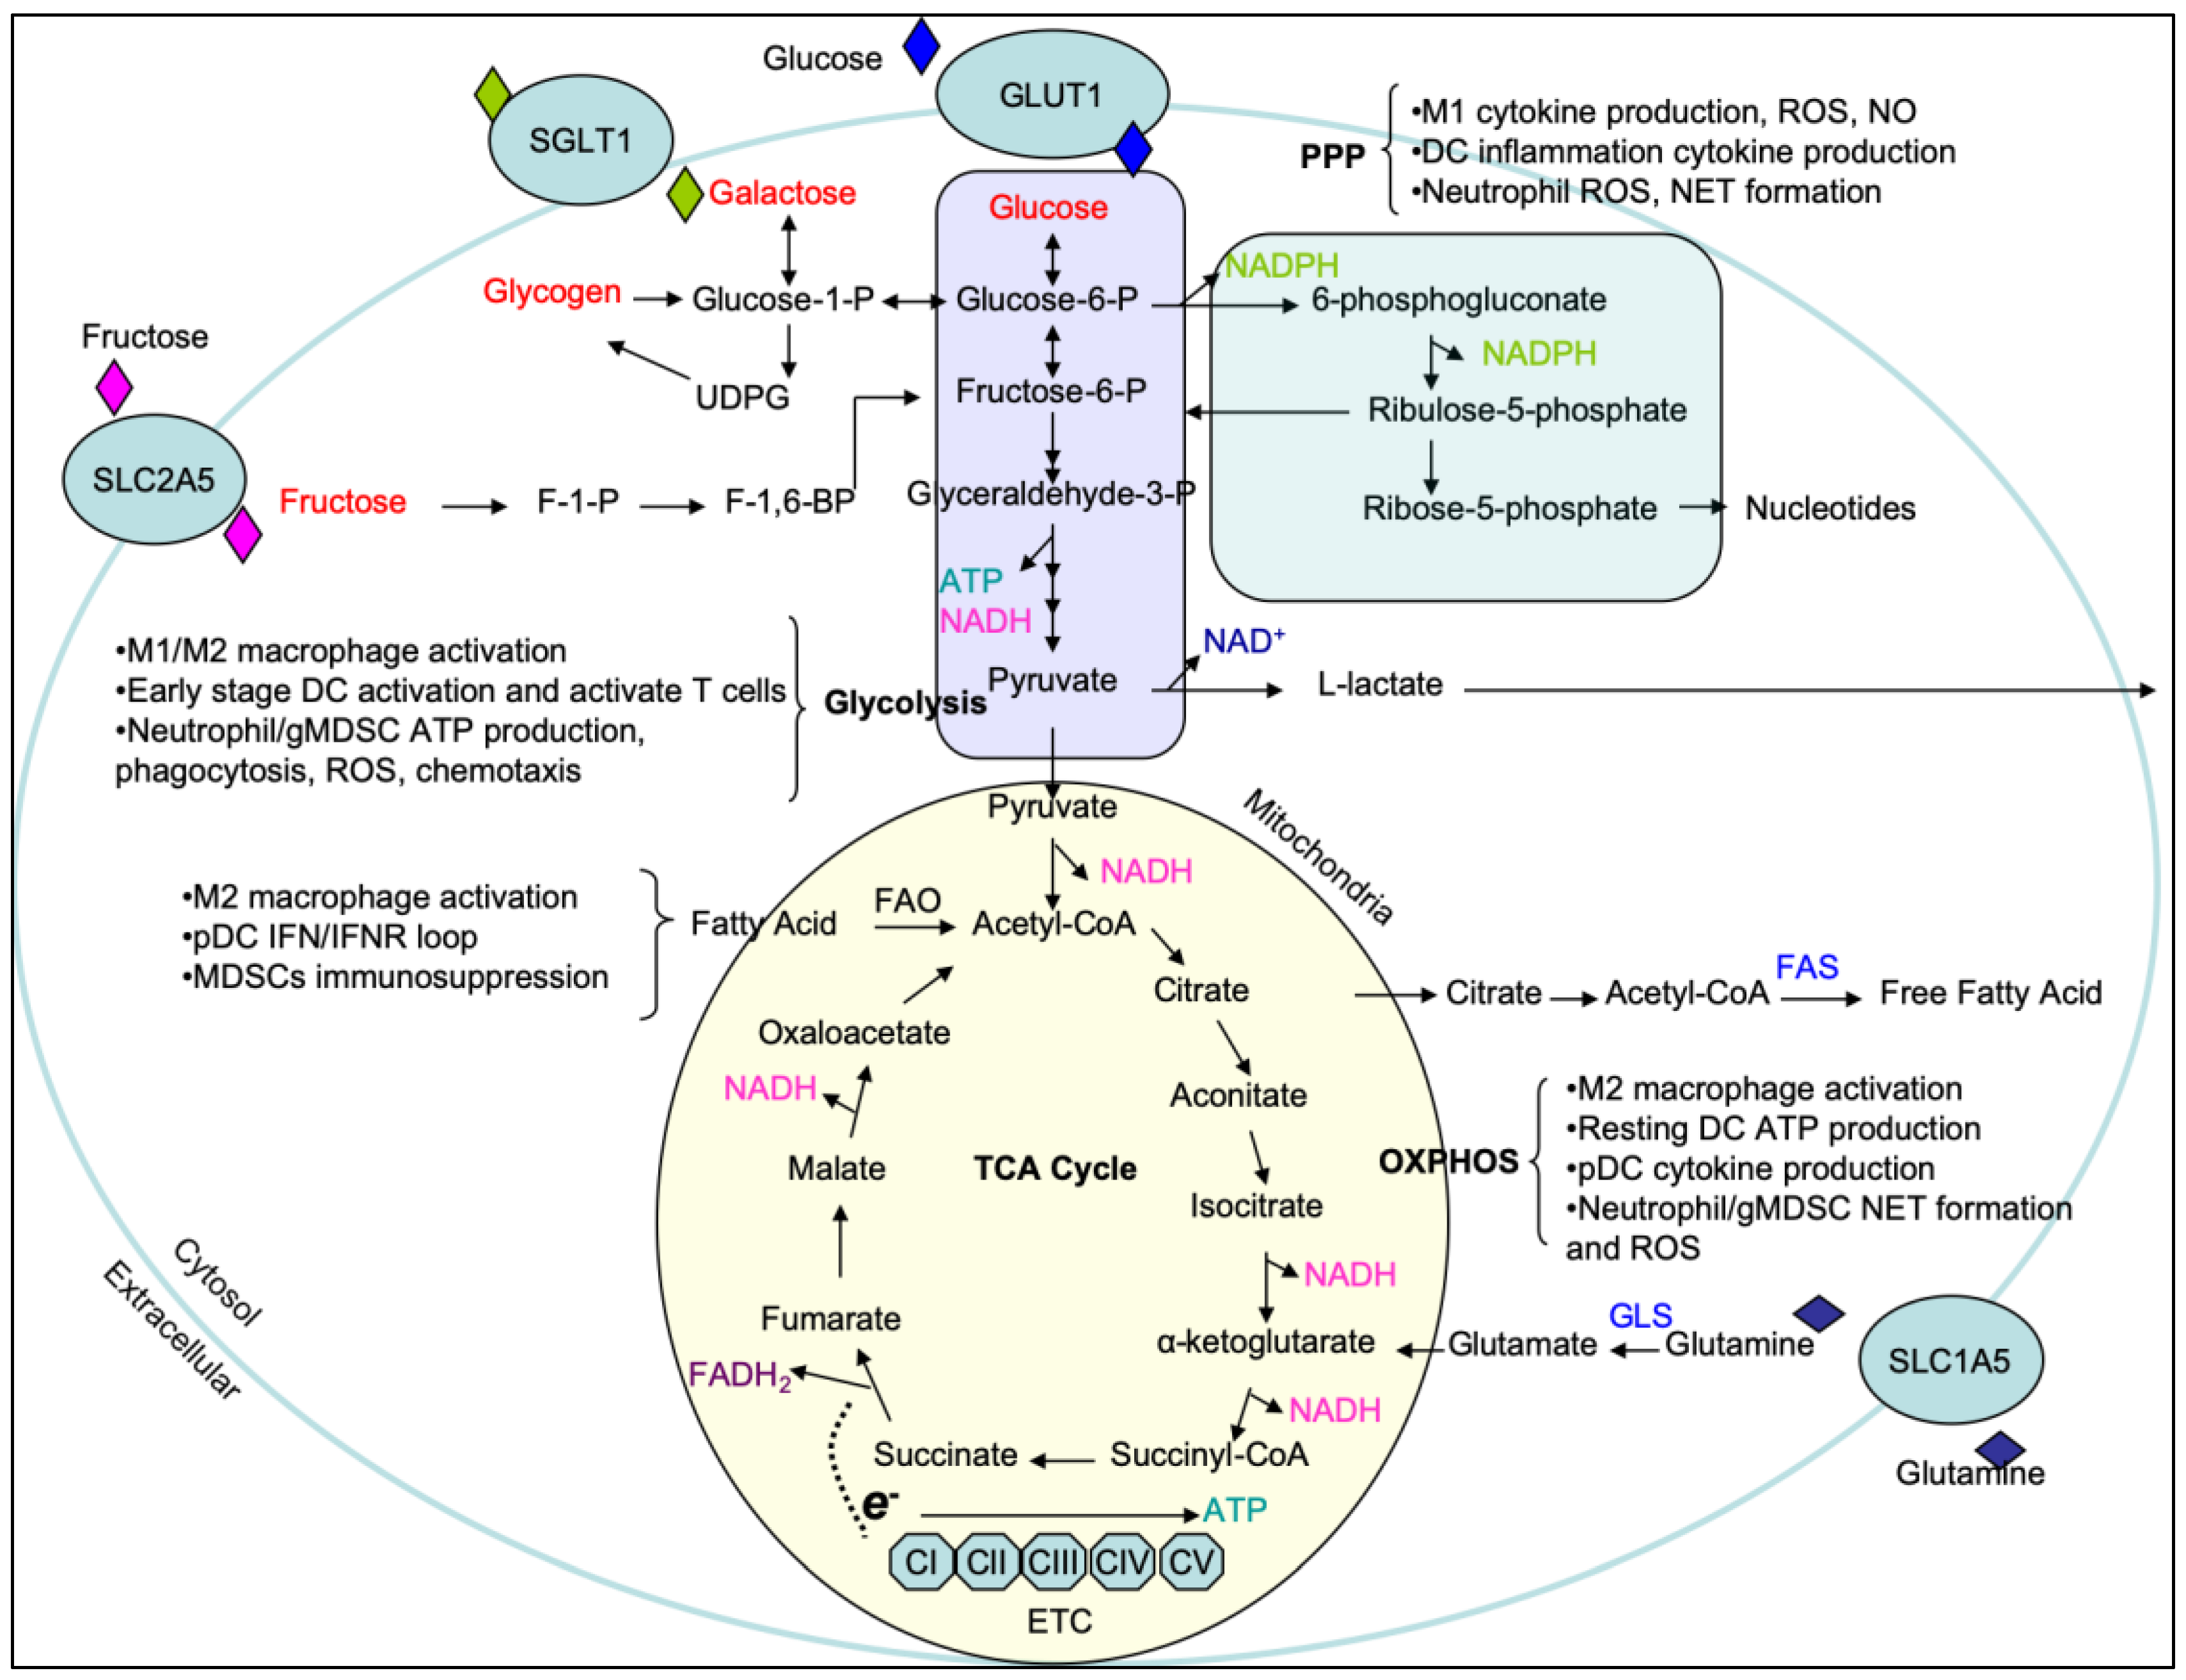 Carbohydrate metabolism and metabolic health